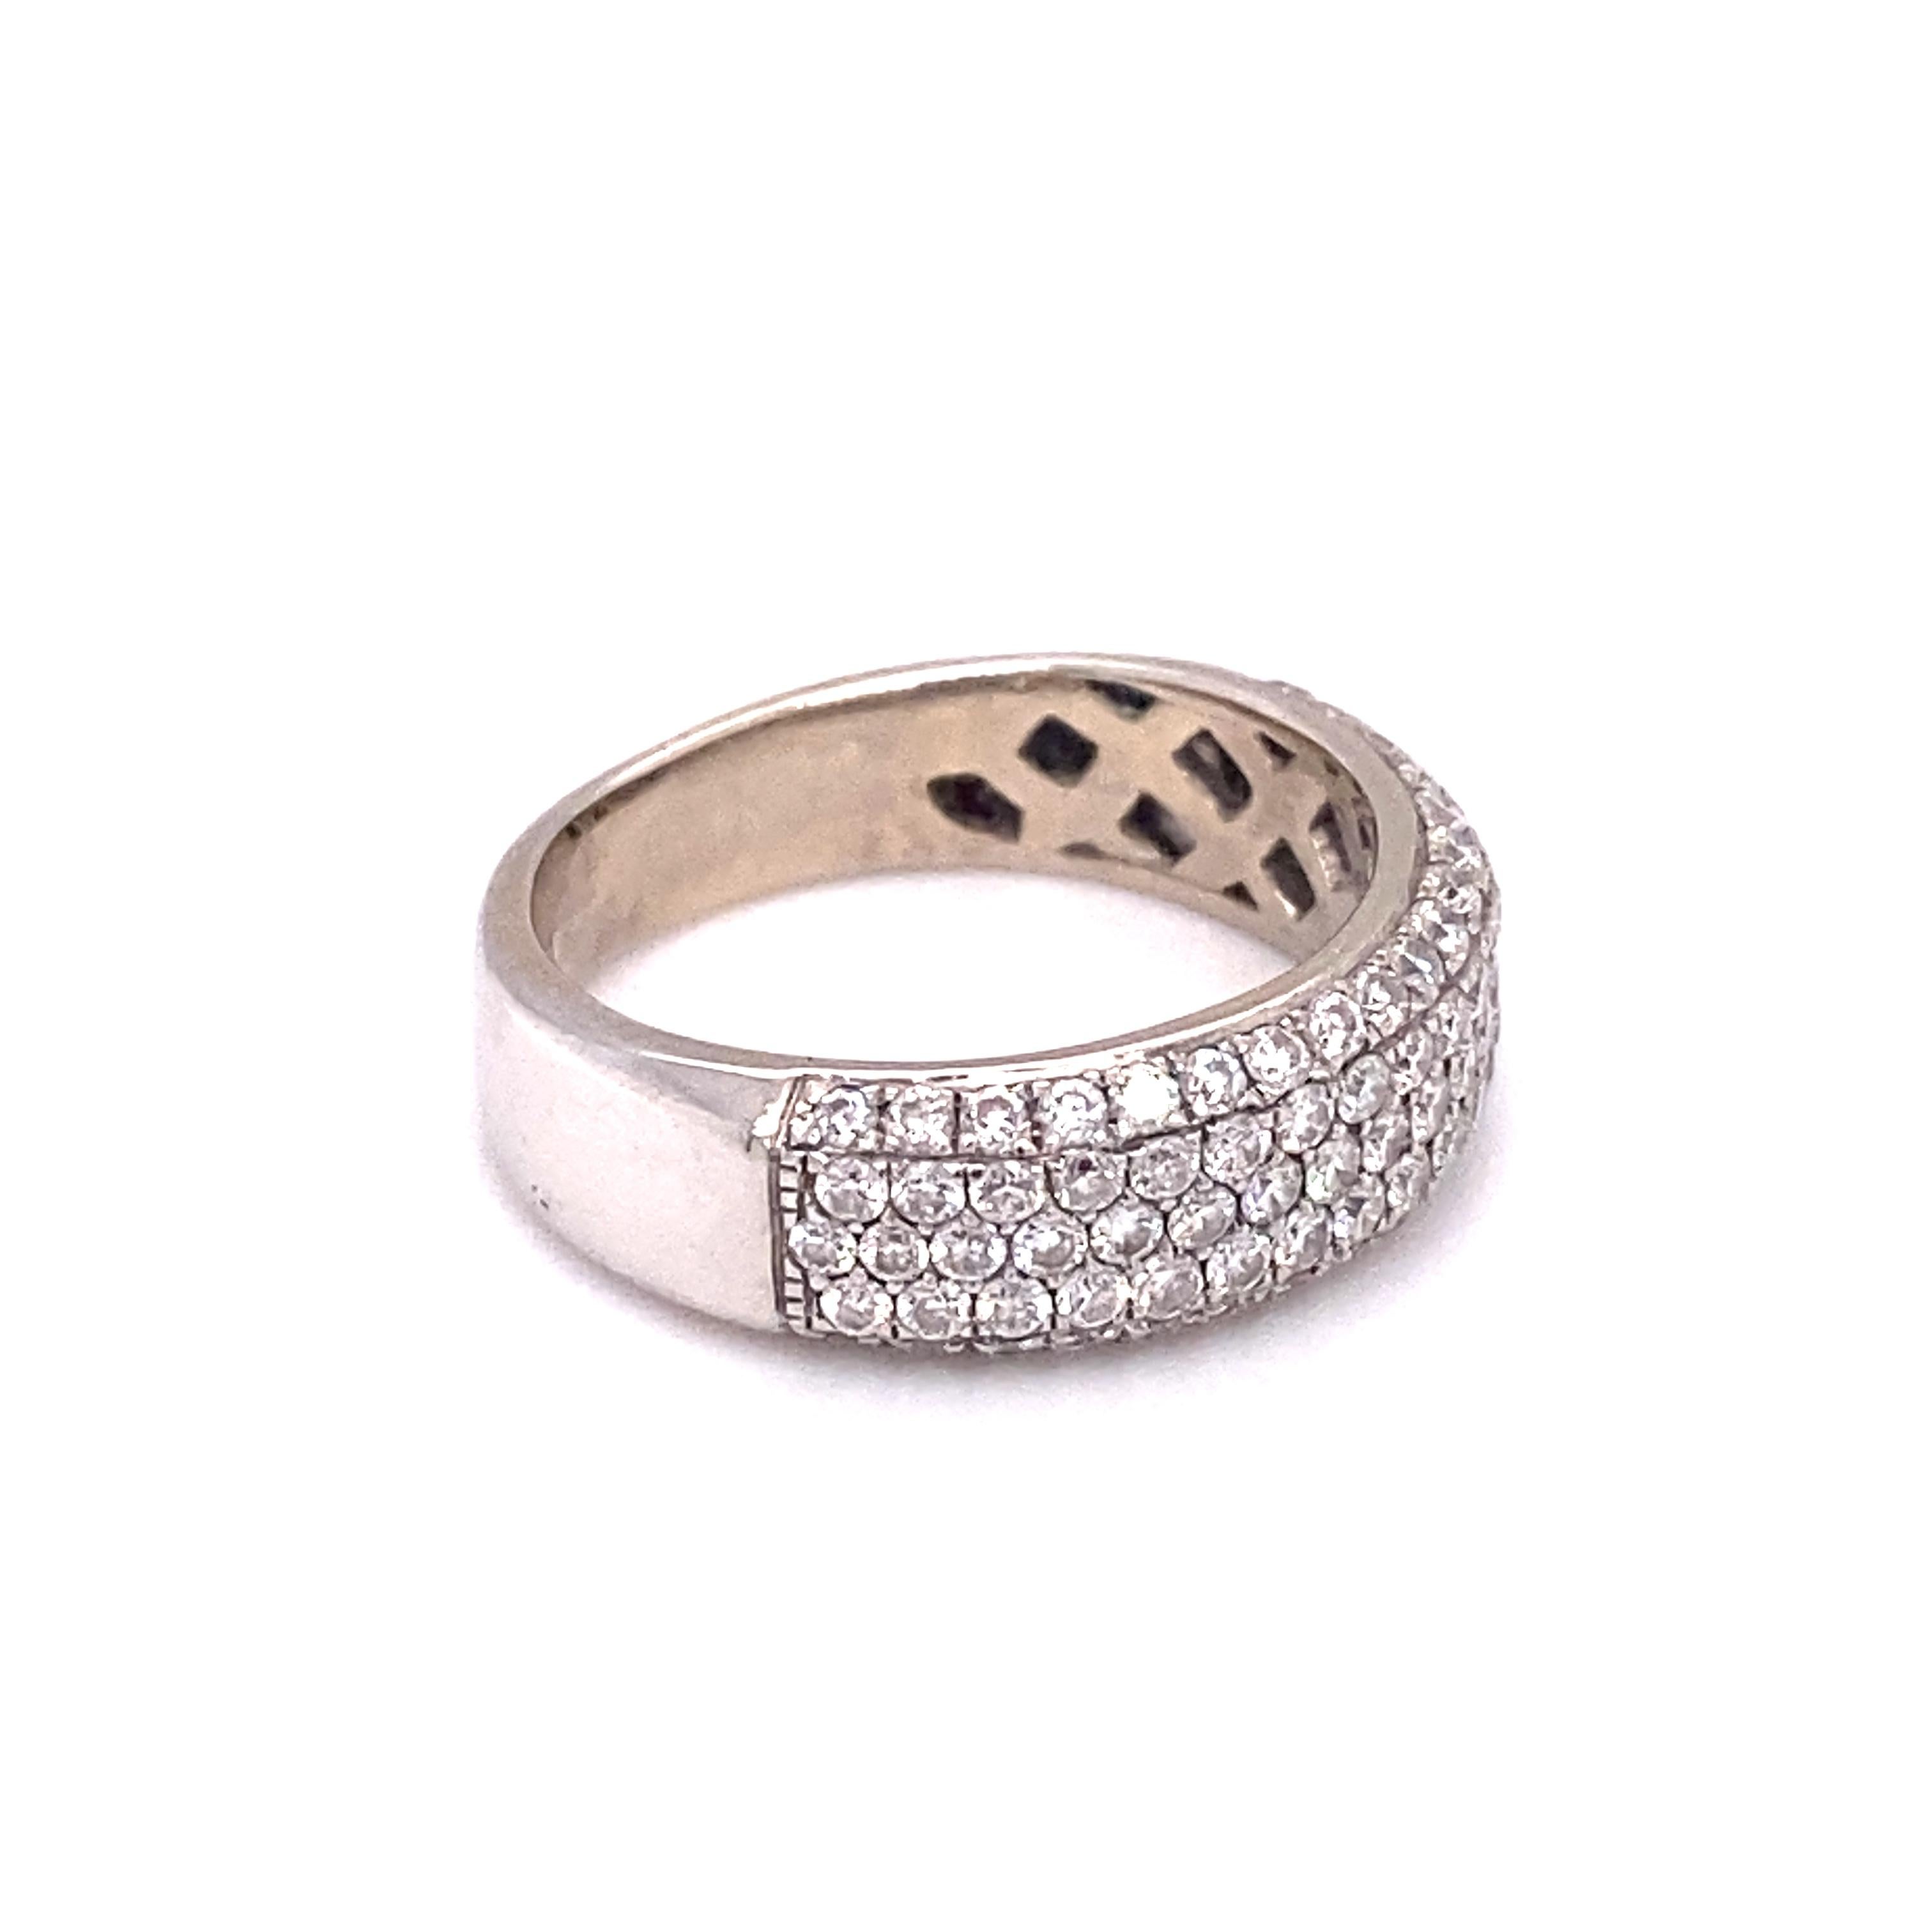 Women's or Men's Circa 2000s 1.25 Carat Total Weight Diamond Five Row Band in 14 Karat White Gold For Sale